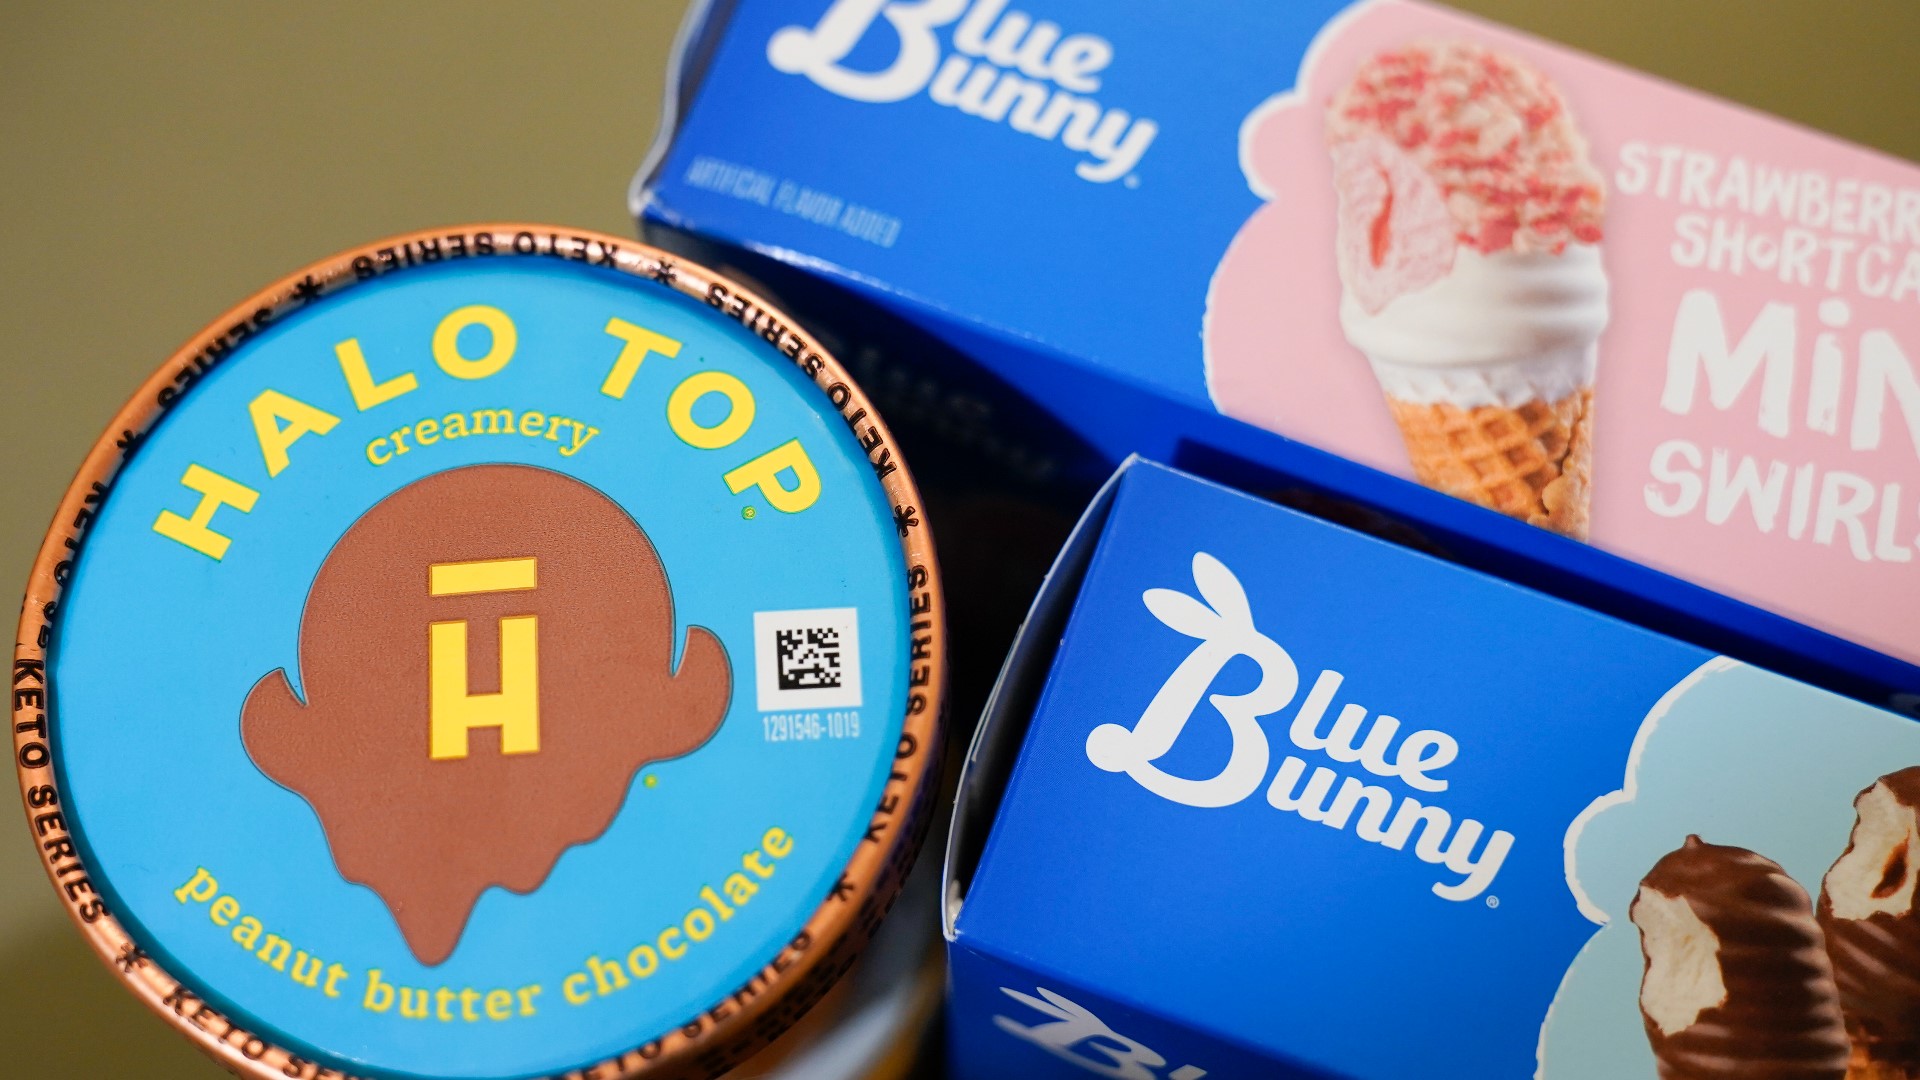 Wells, a 100-year-old family-owned company based in Le Mars, Iowa, makes Blue Bunny, Halo Top and other brands. It will continue to operate as a standalone company.